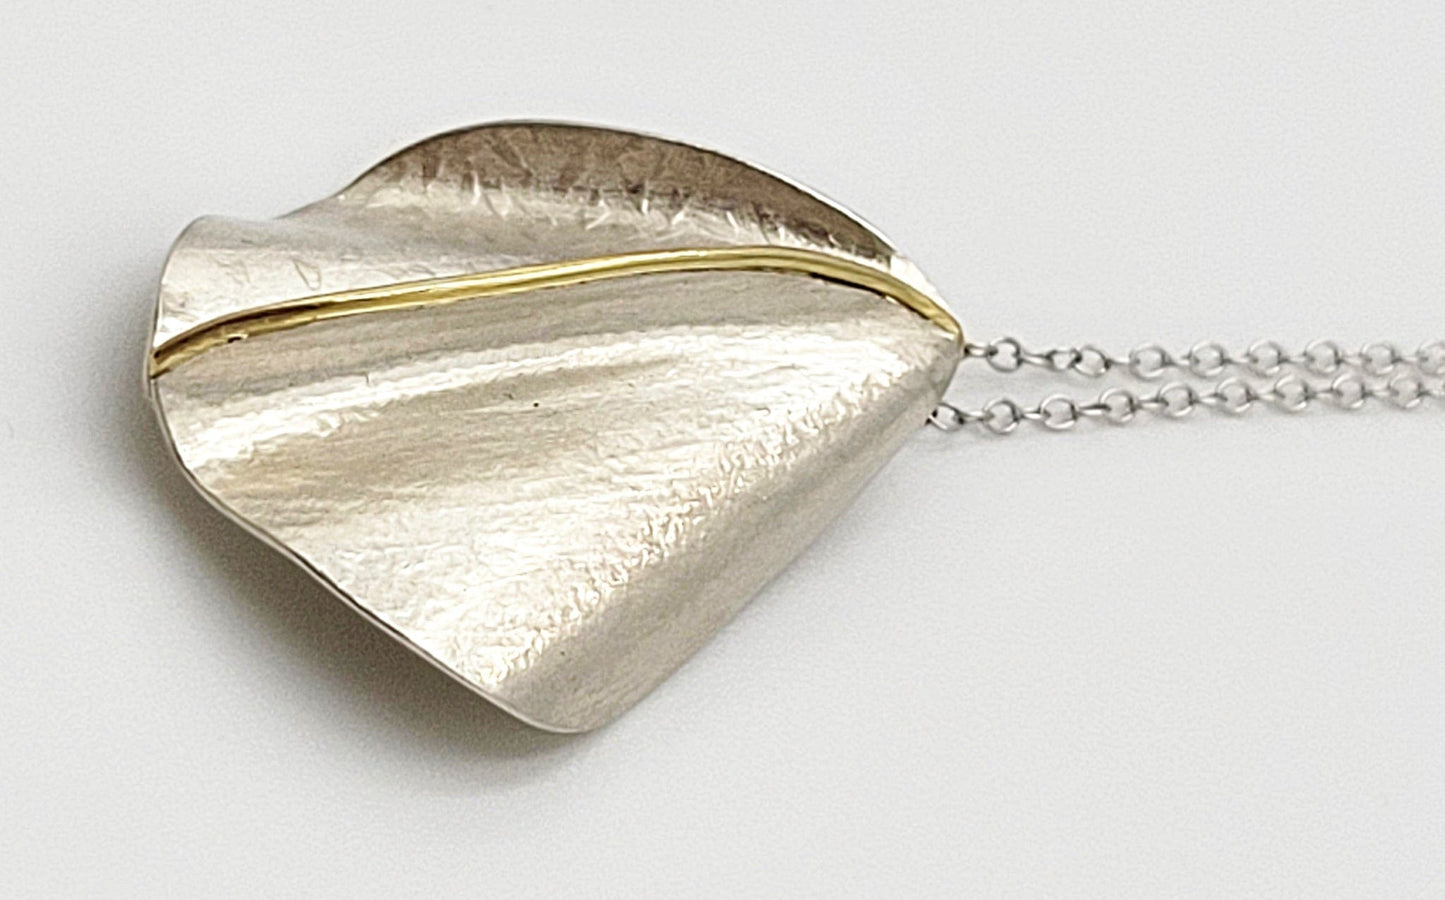 Artisan Signed Necklace Jewelry Artisan Sterling 18k Gold Abstract Modernist Textured Pendant Necklace Signed